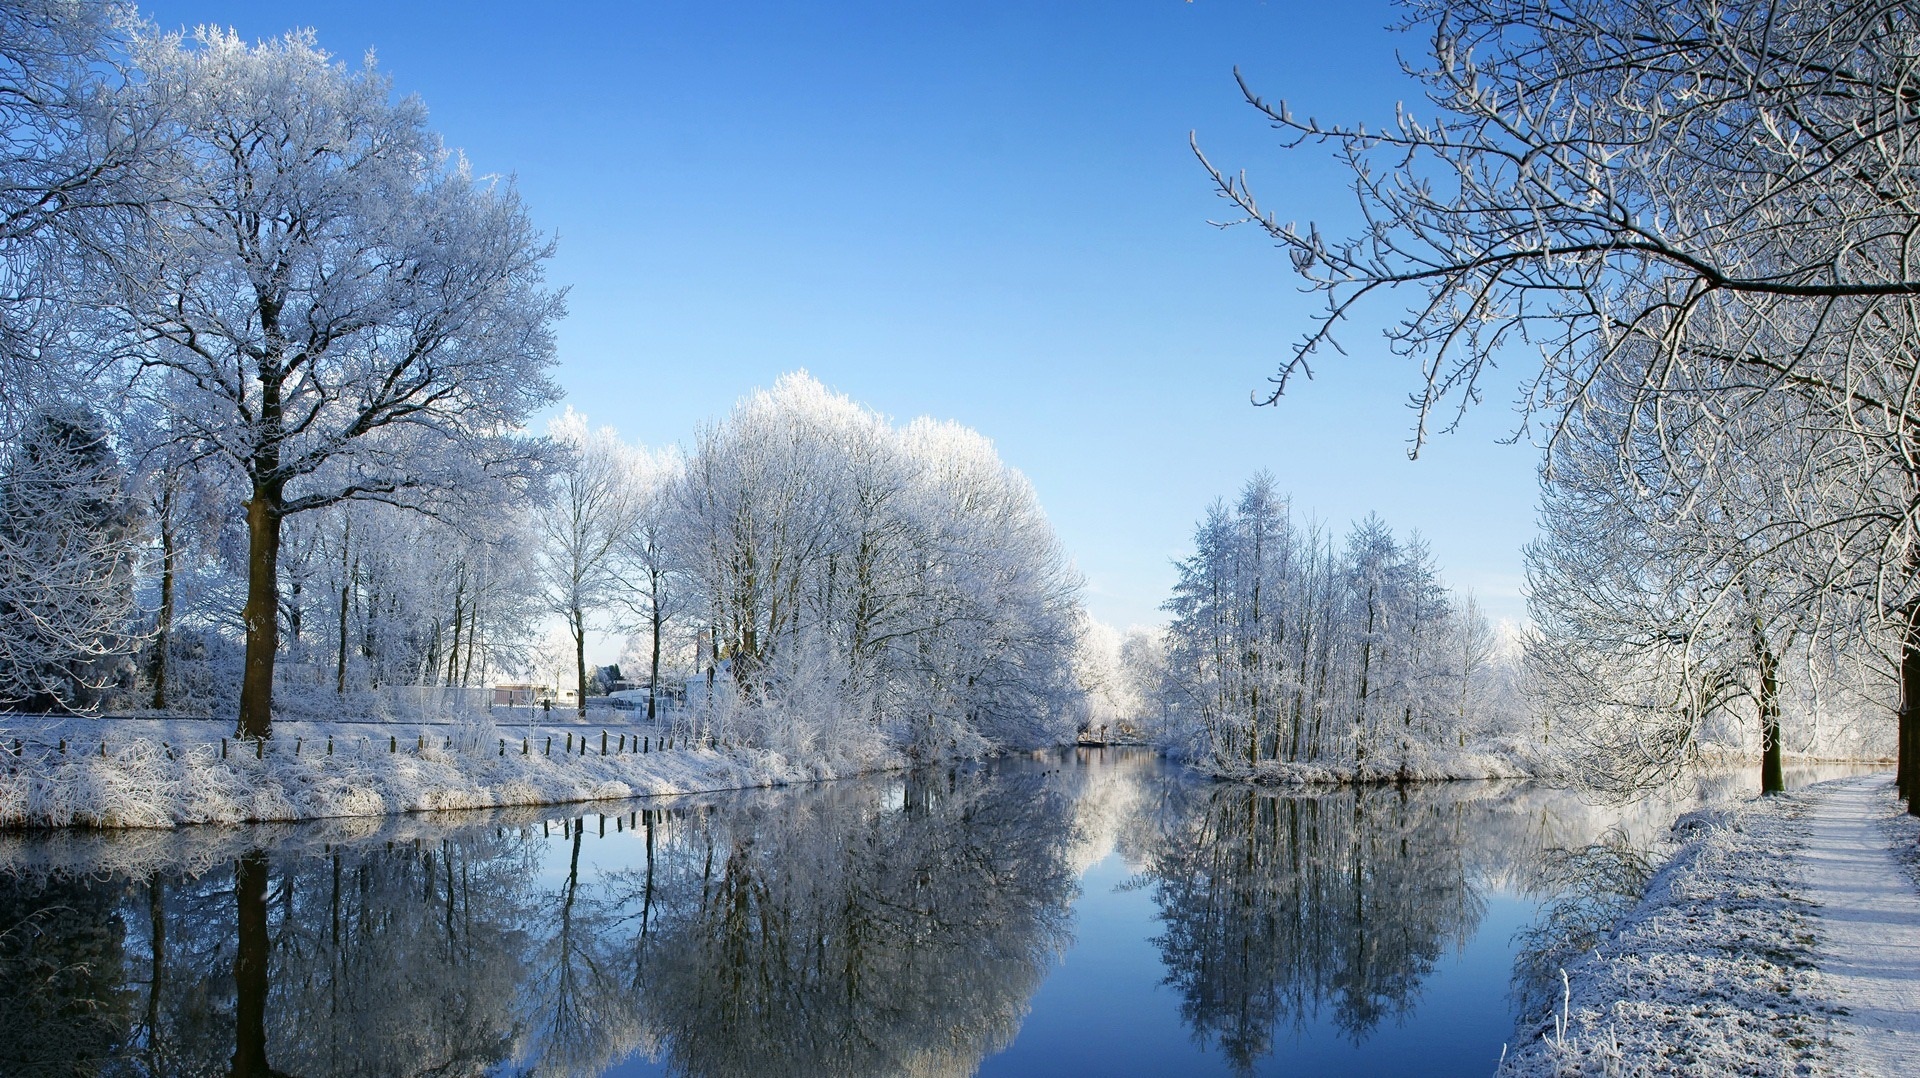 Scenery Pics images Winter trees HD wallpaper and background photos ...